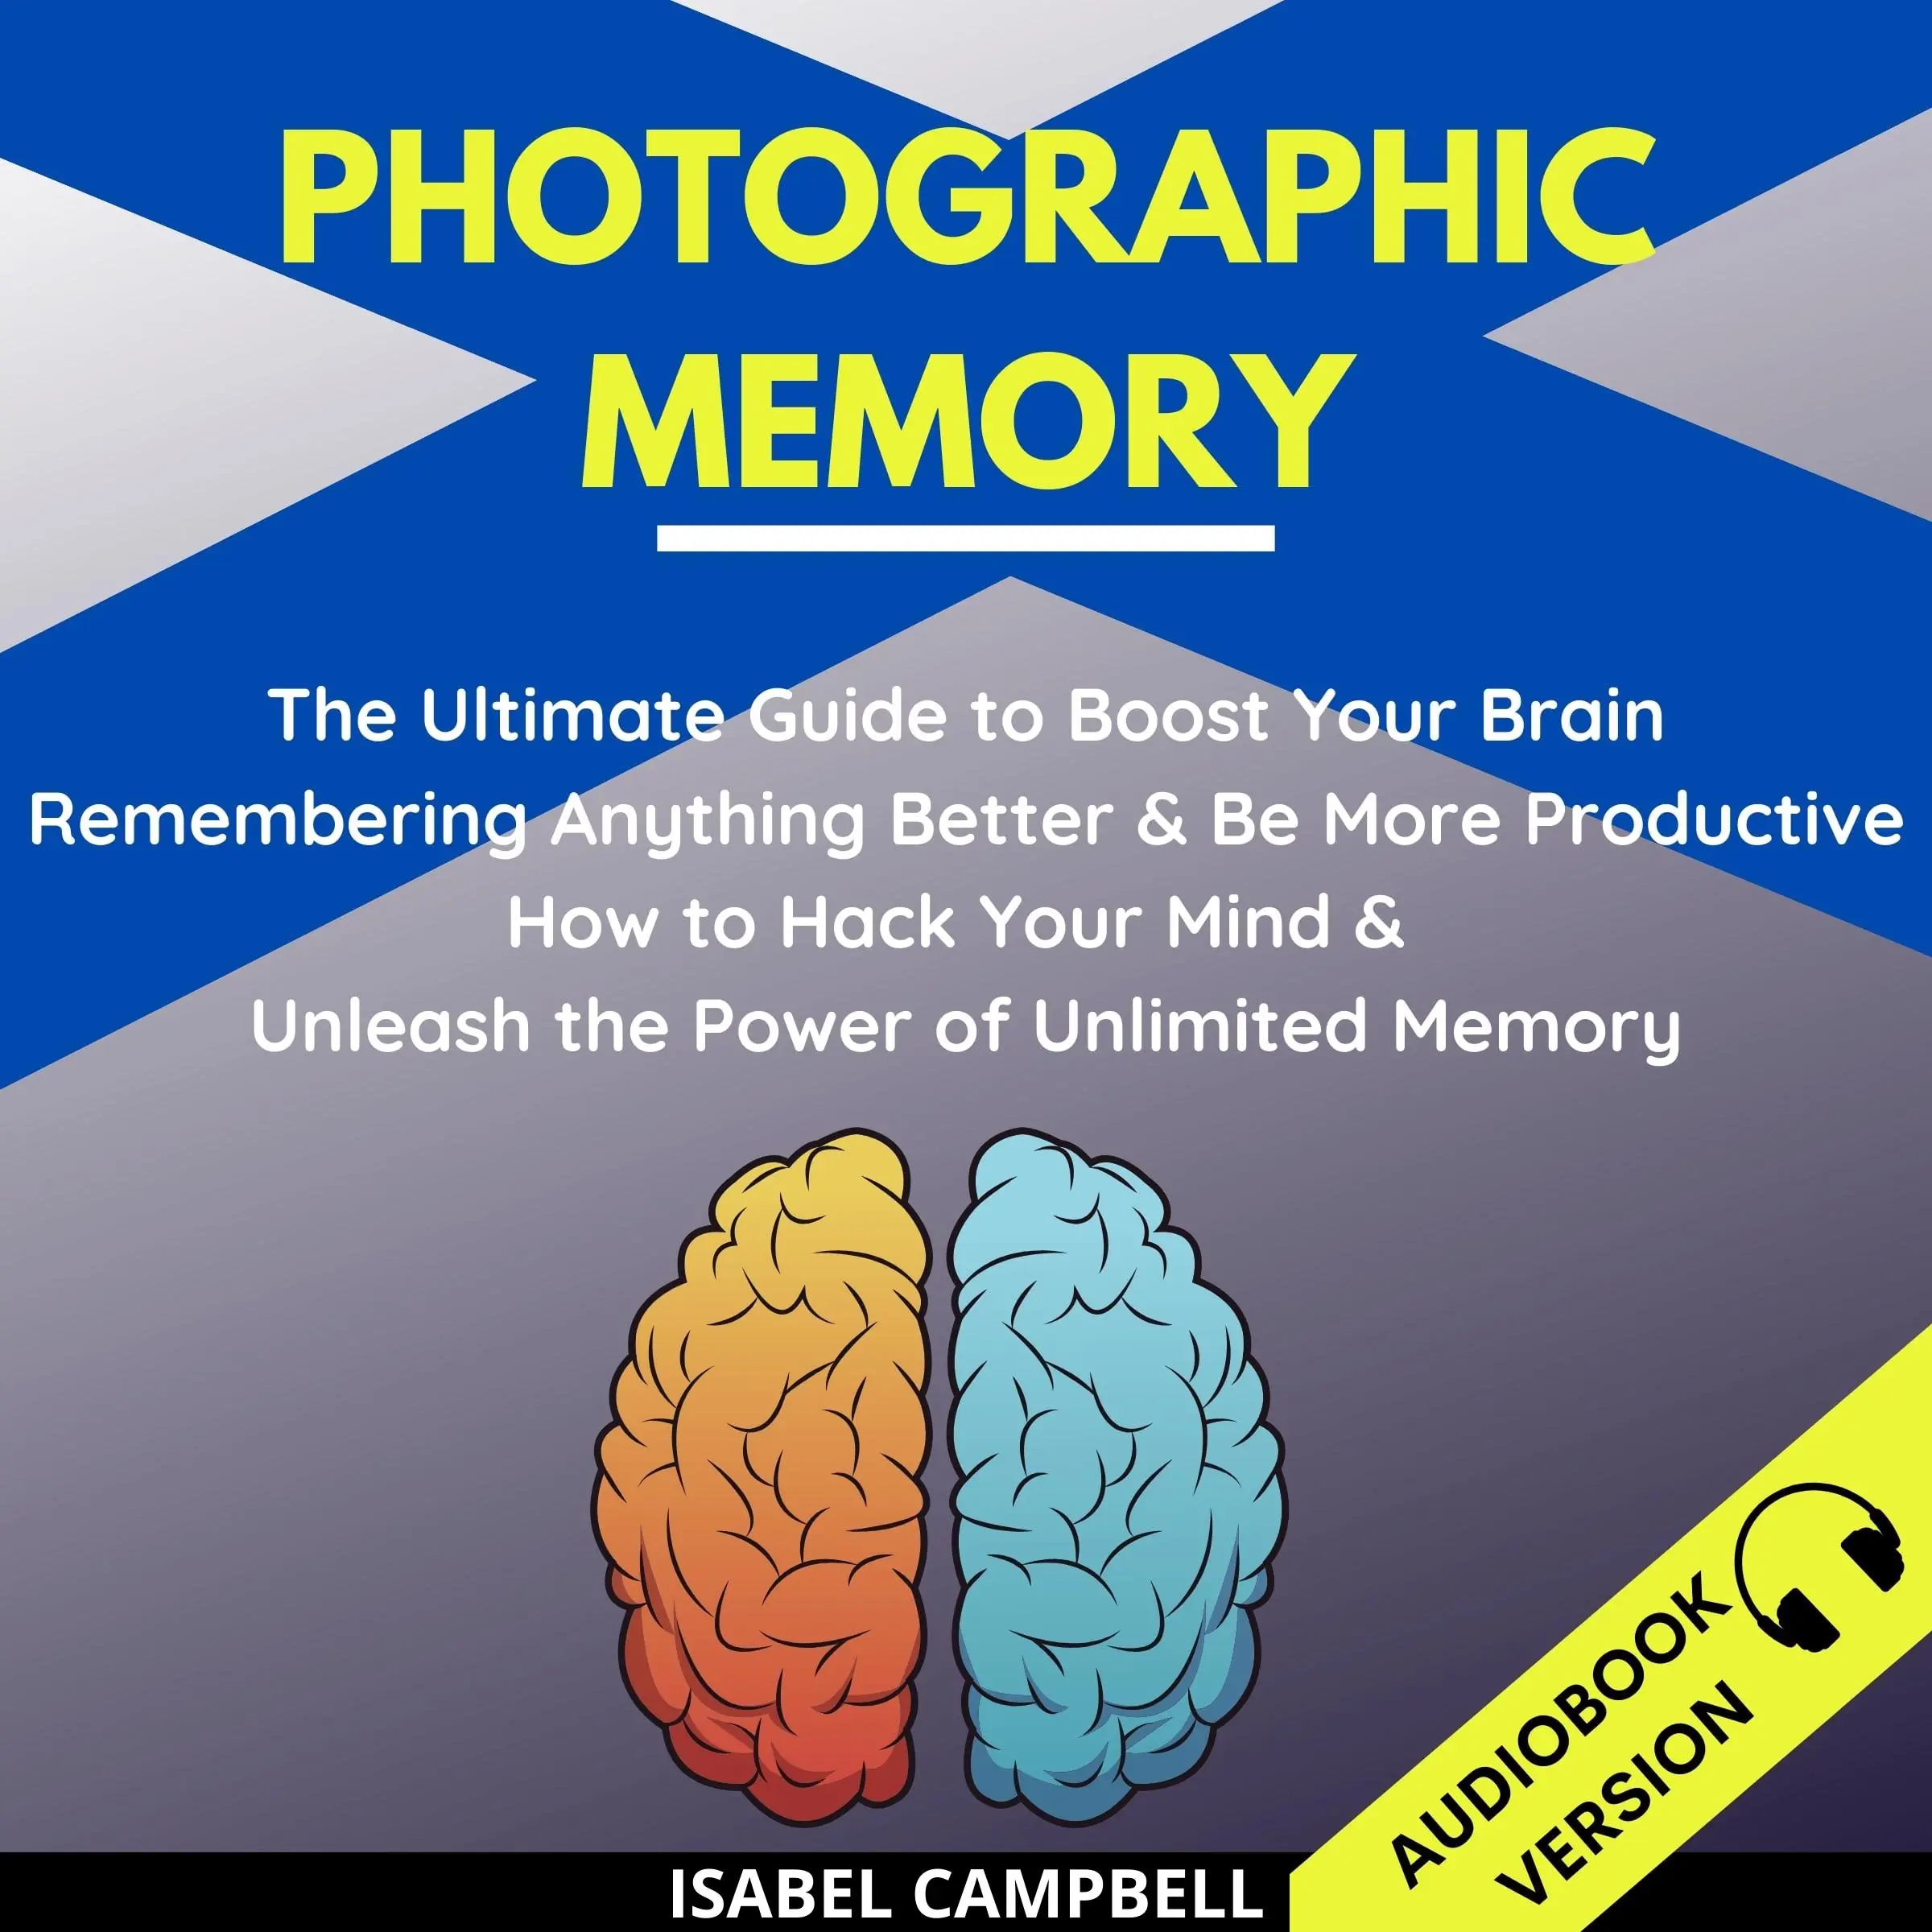 Photographic Memory Audiobook by Isabel Campbell